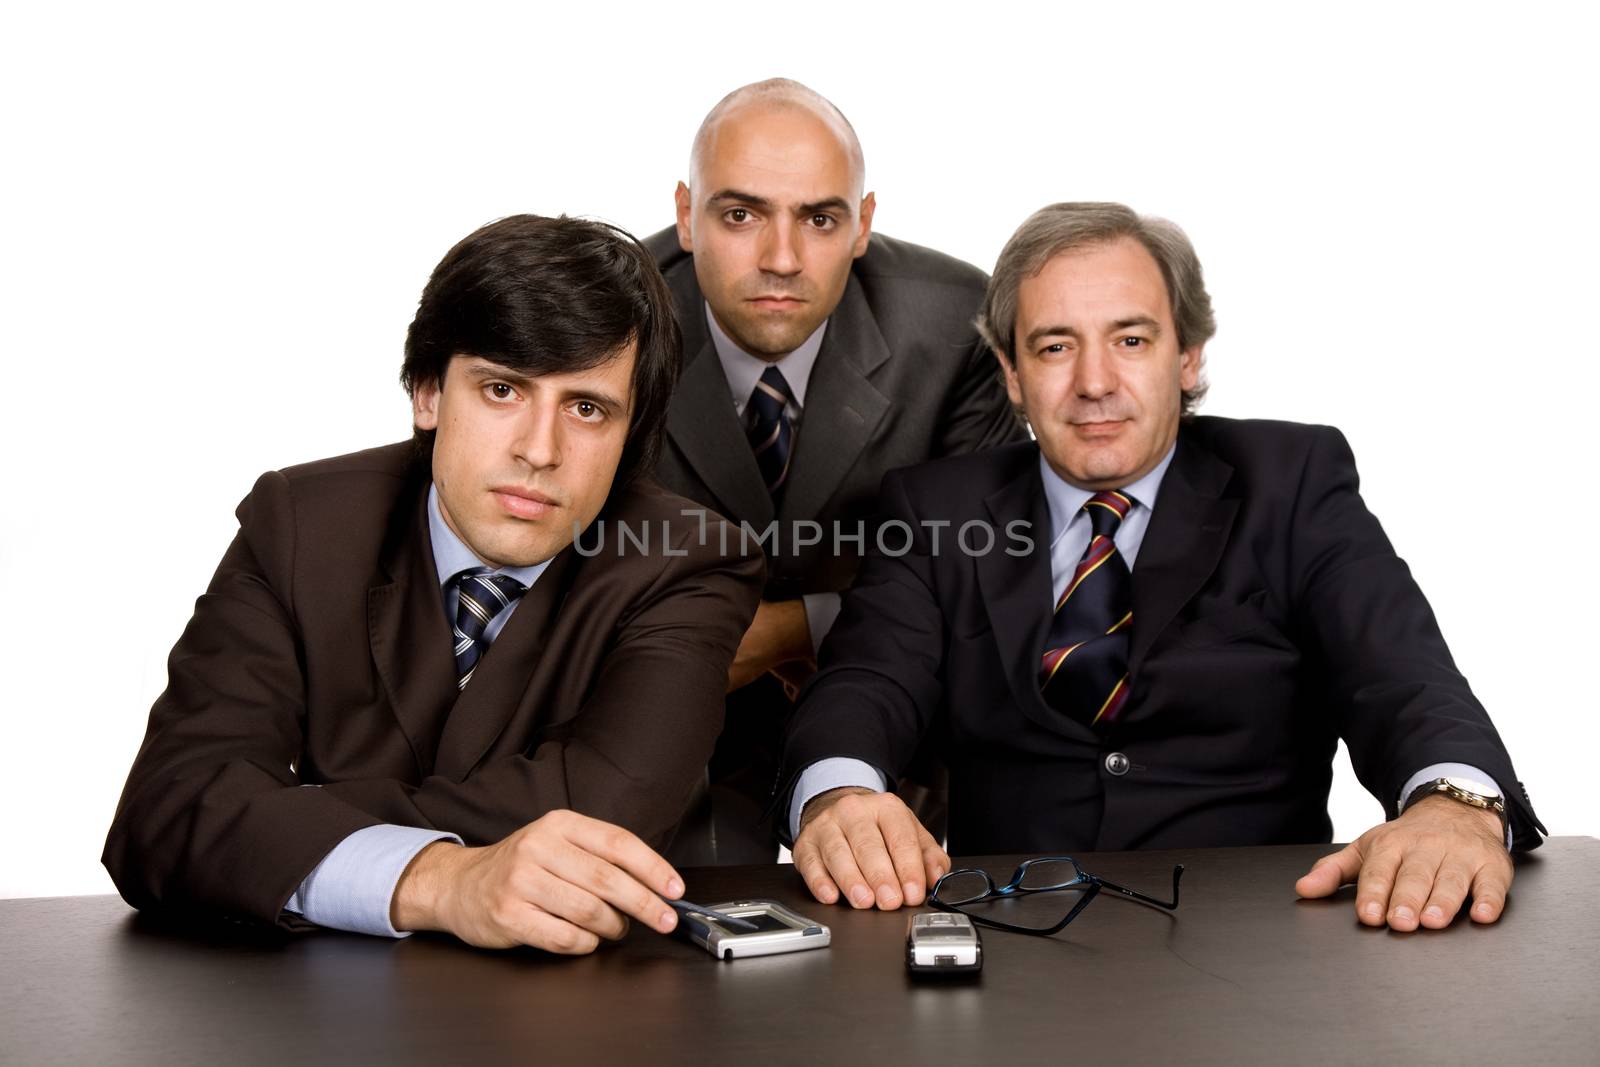 group of workers on a desk, isolated on white